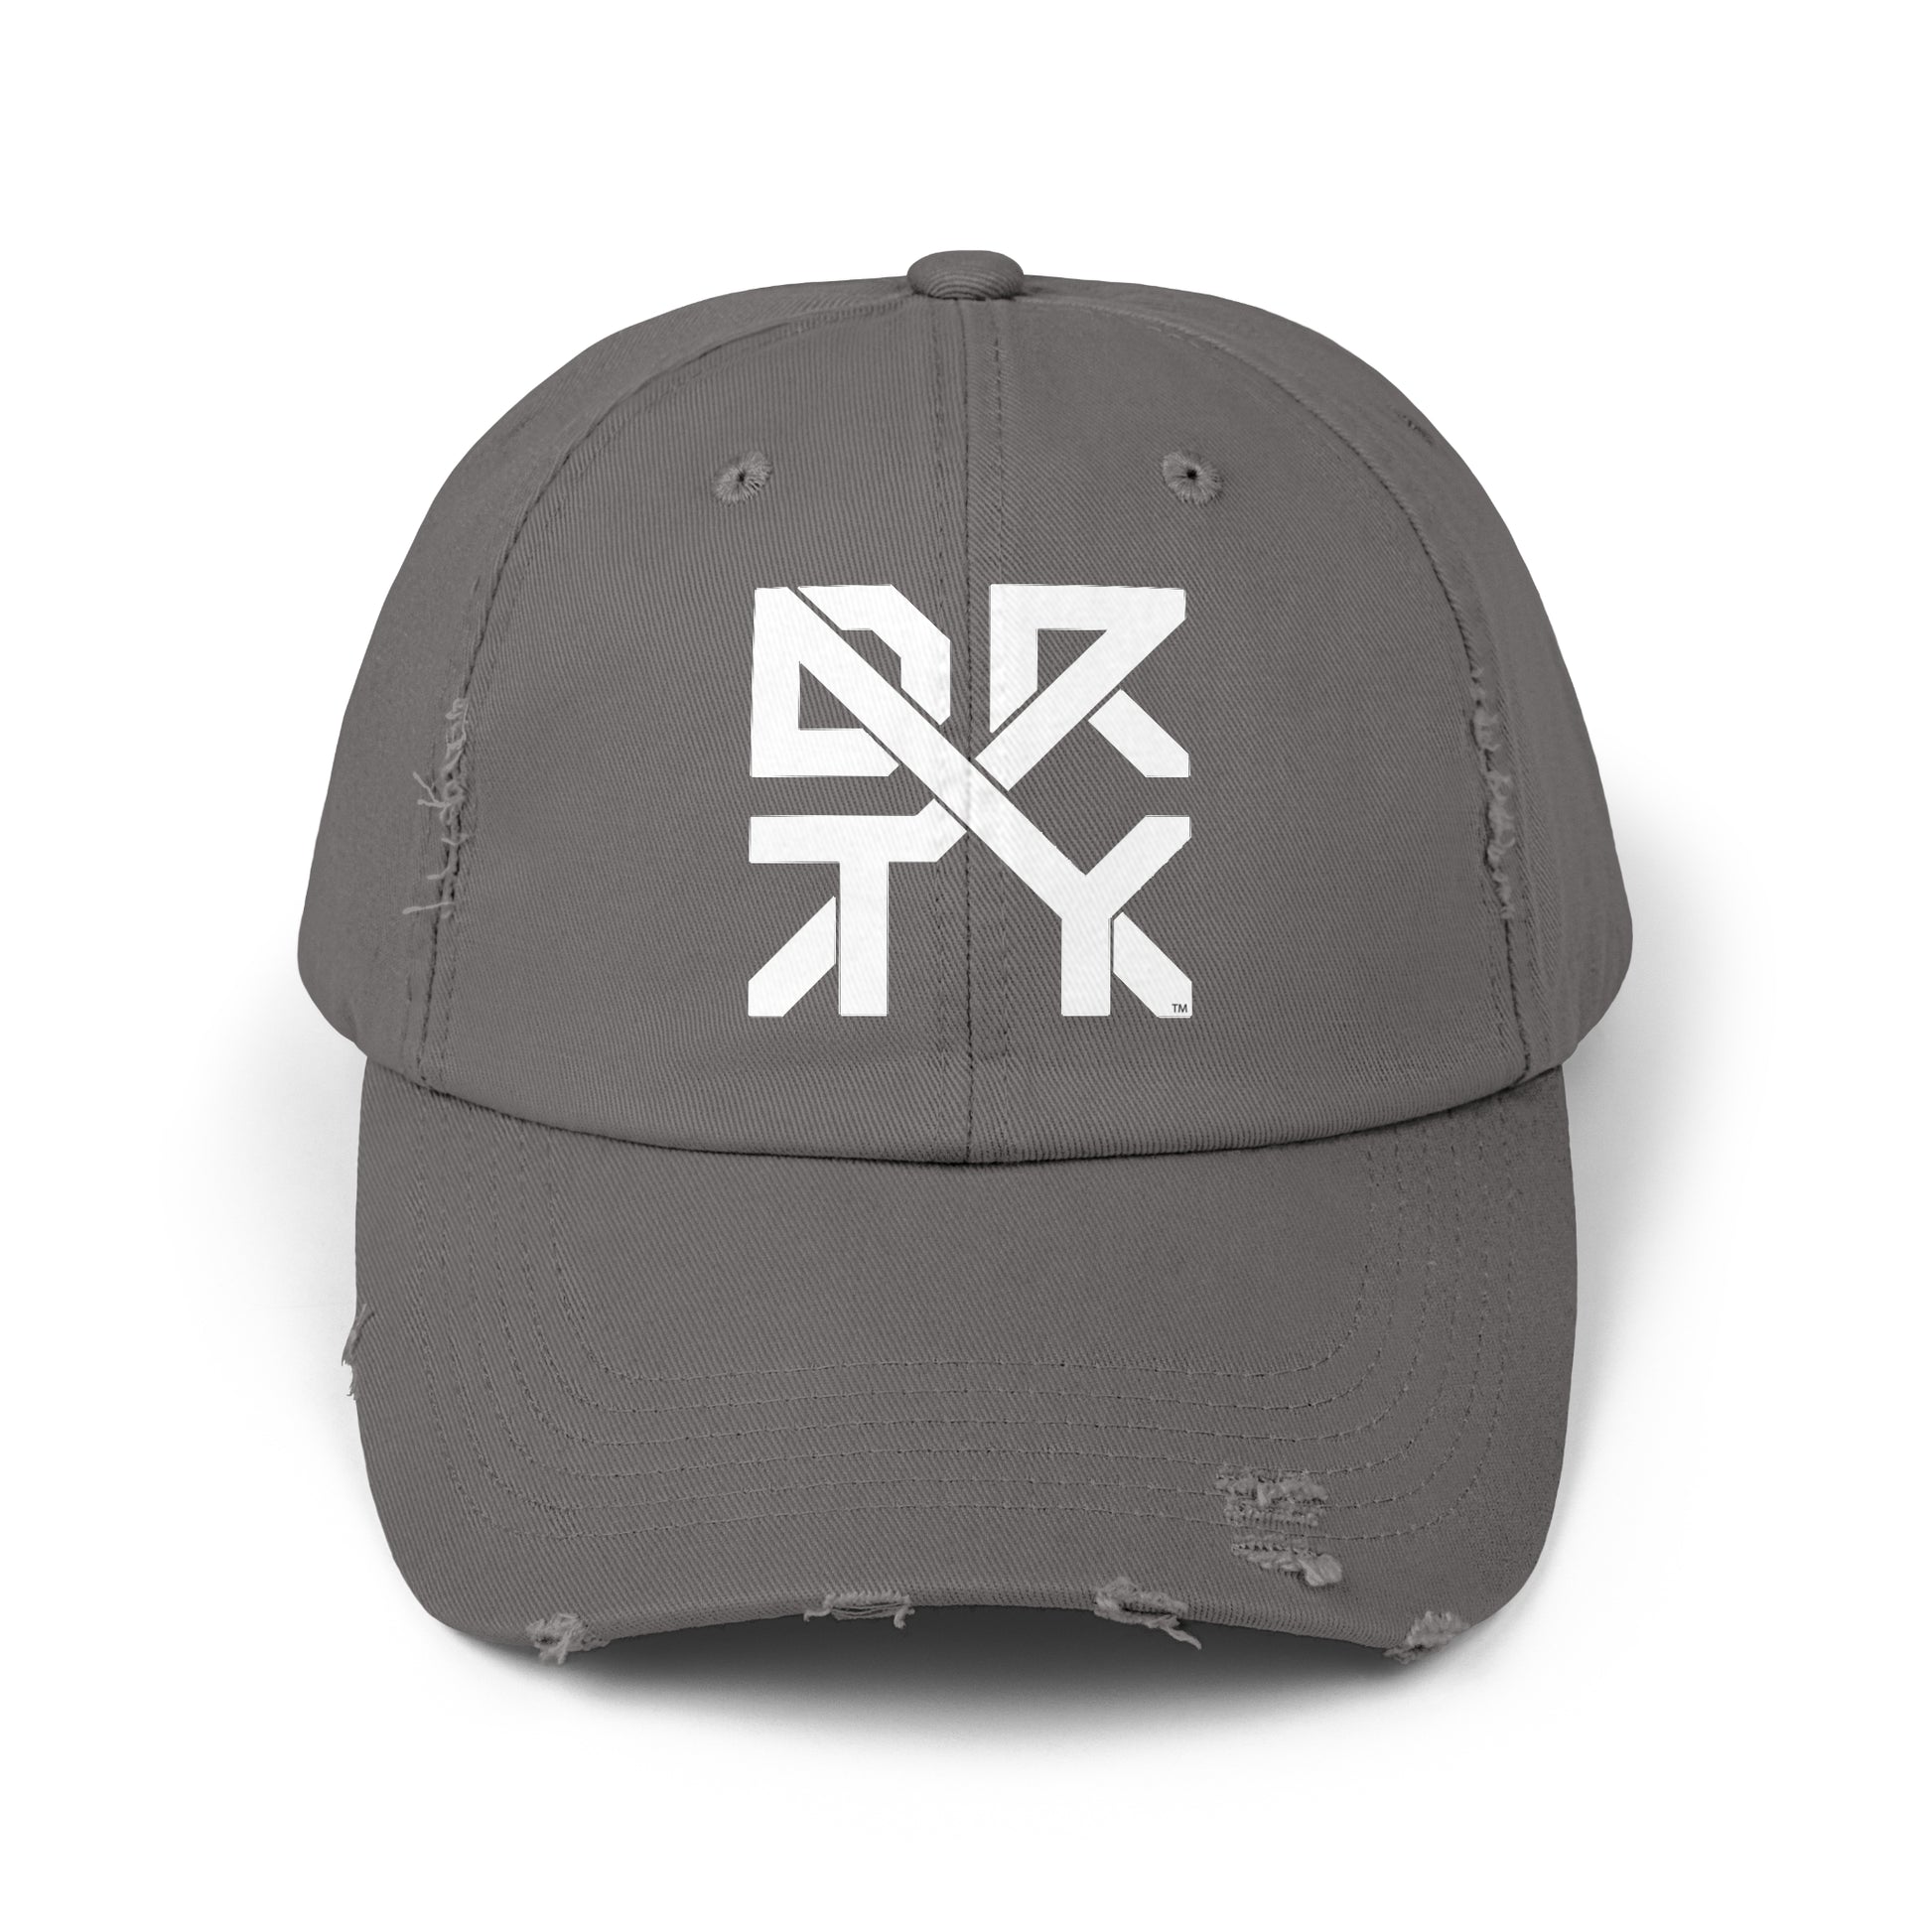 This image showcases the front view of a hat with the logo DRTYX in the center of the hat.